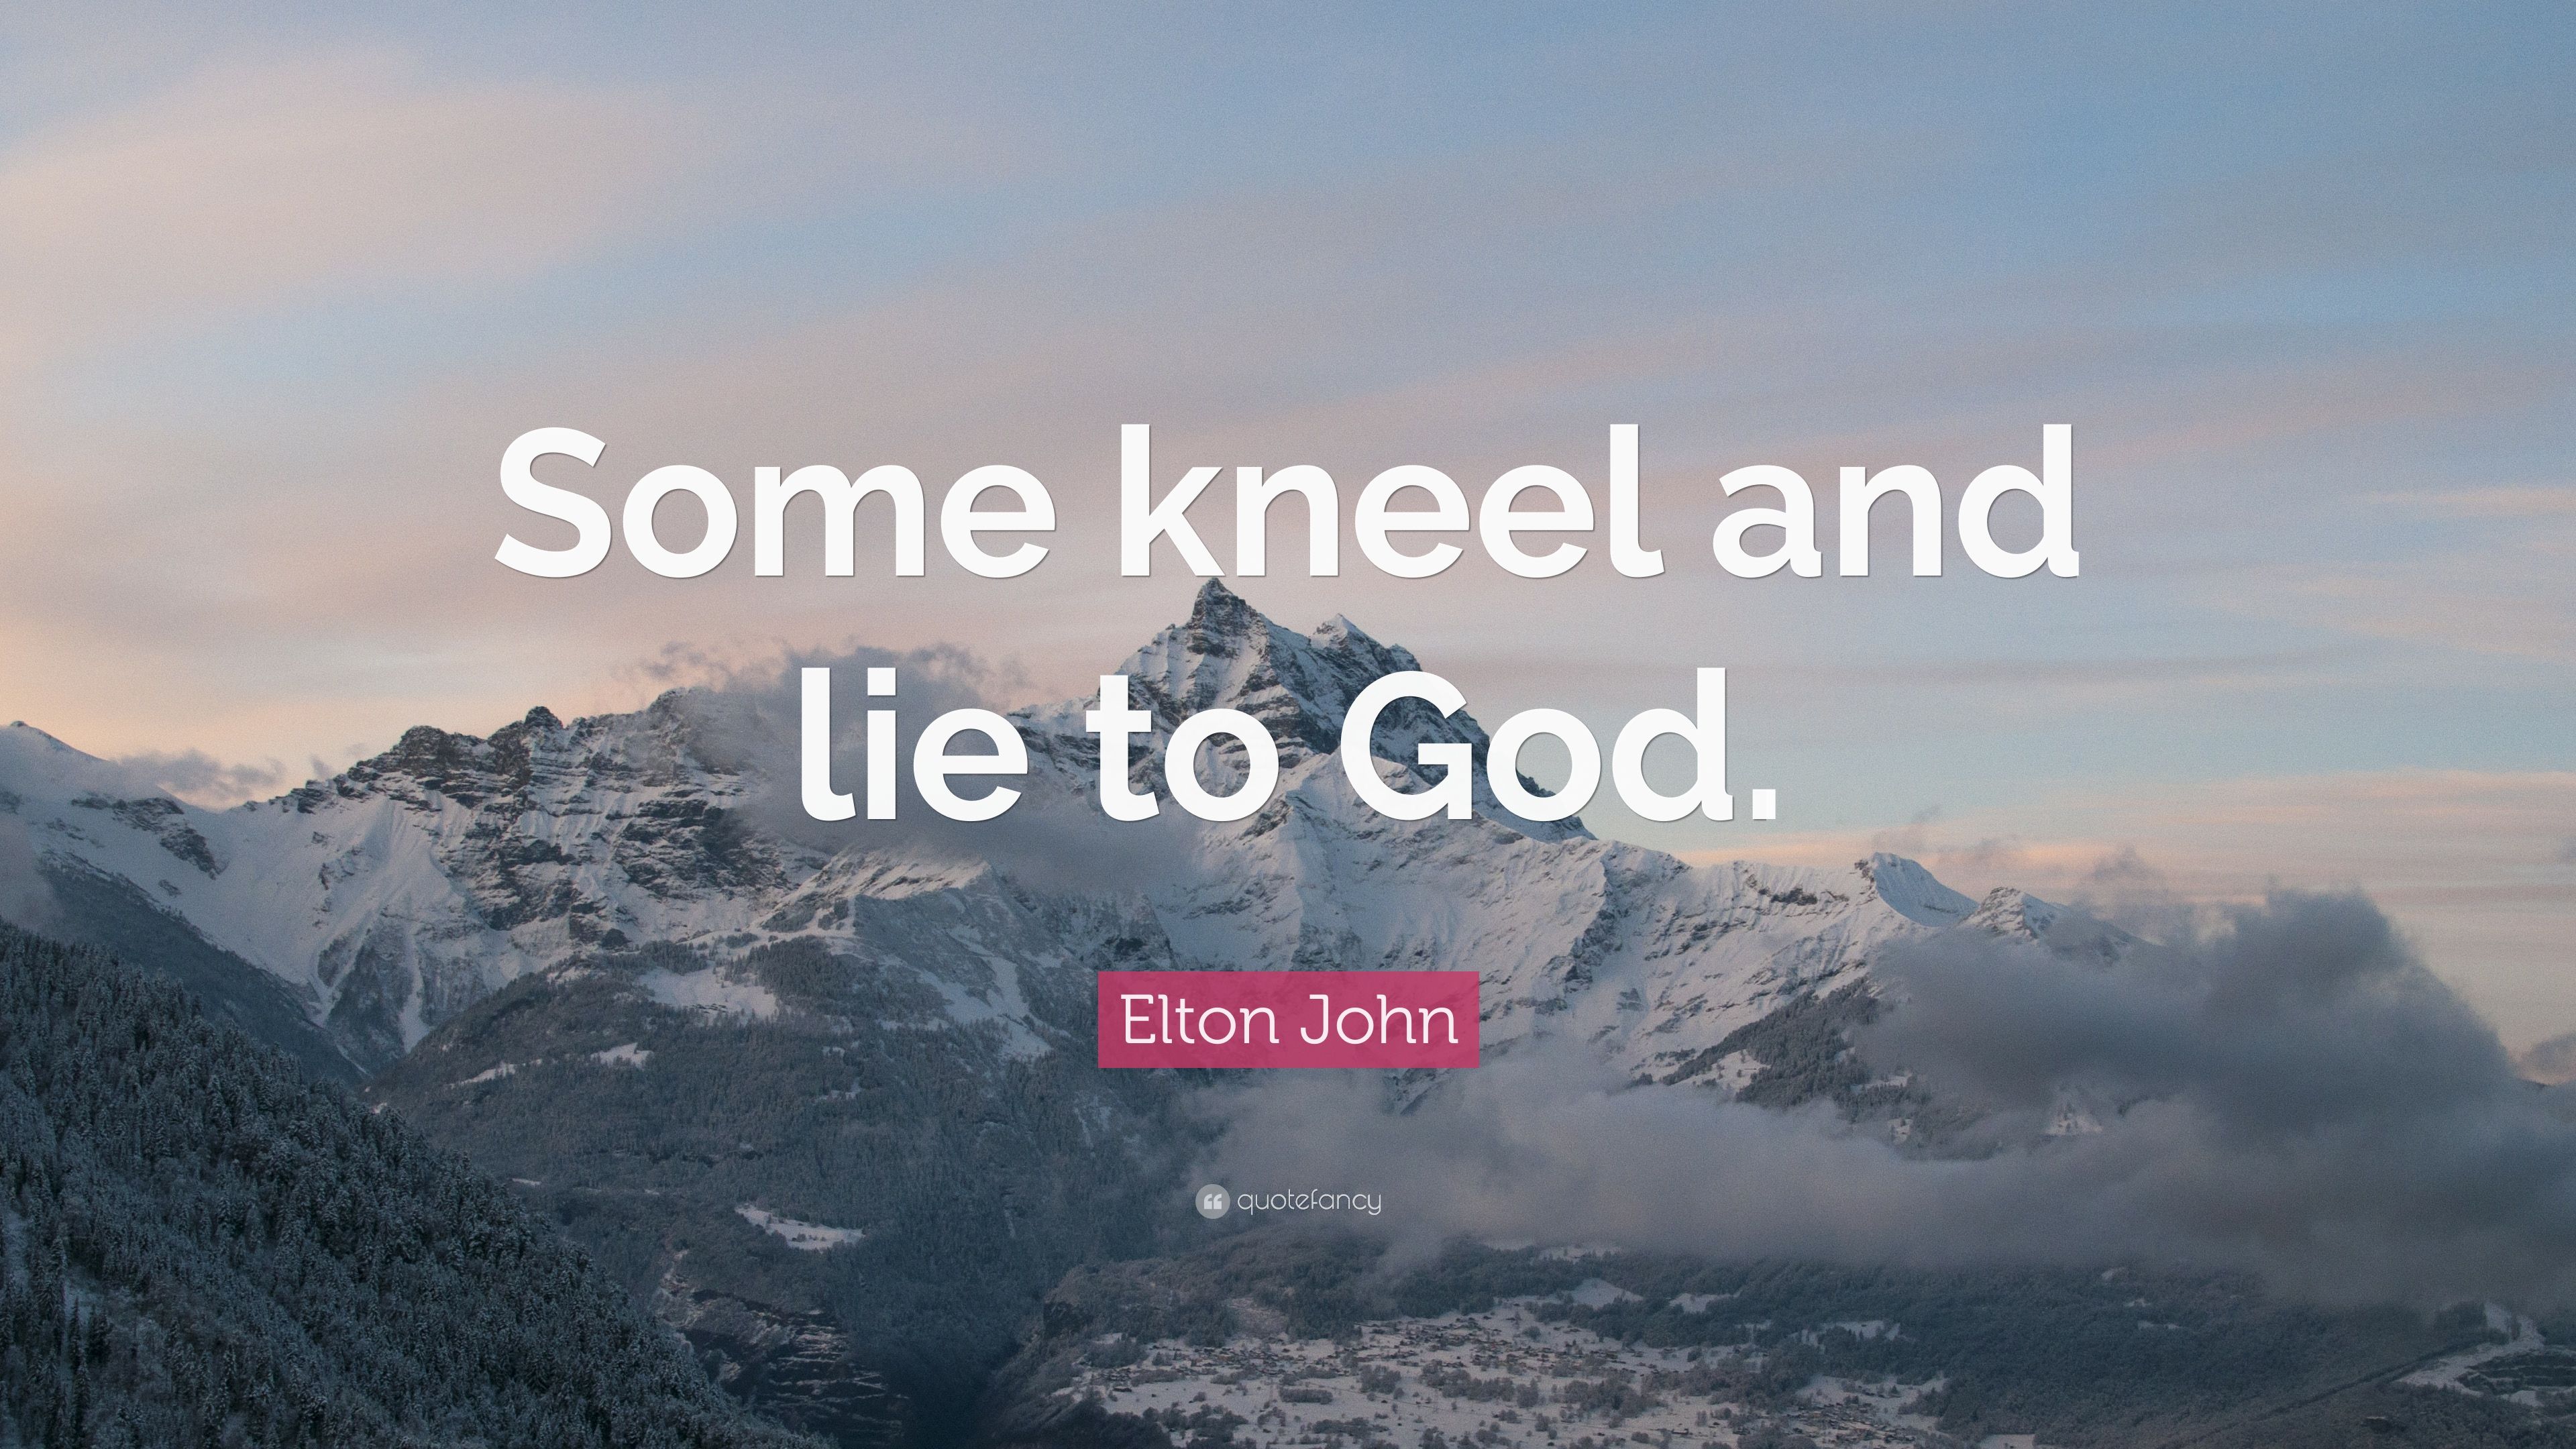 Elton John Quote: “Some kneel and lie to God.” 5 wallpaper